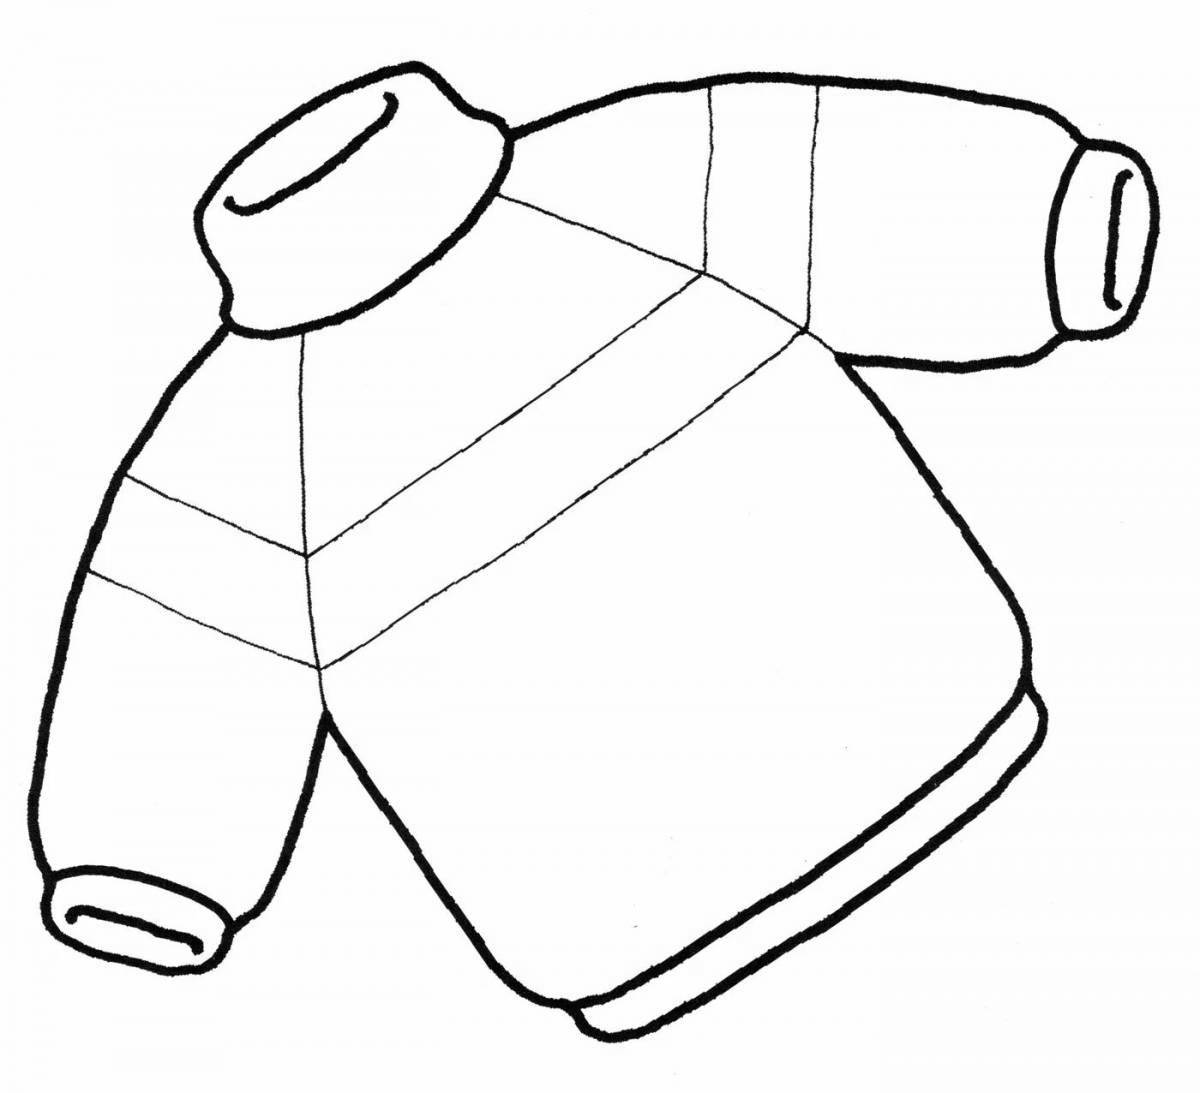 Amazing jacket coloring pages for 3-4 year olds